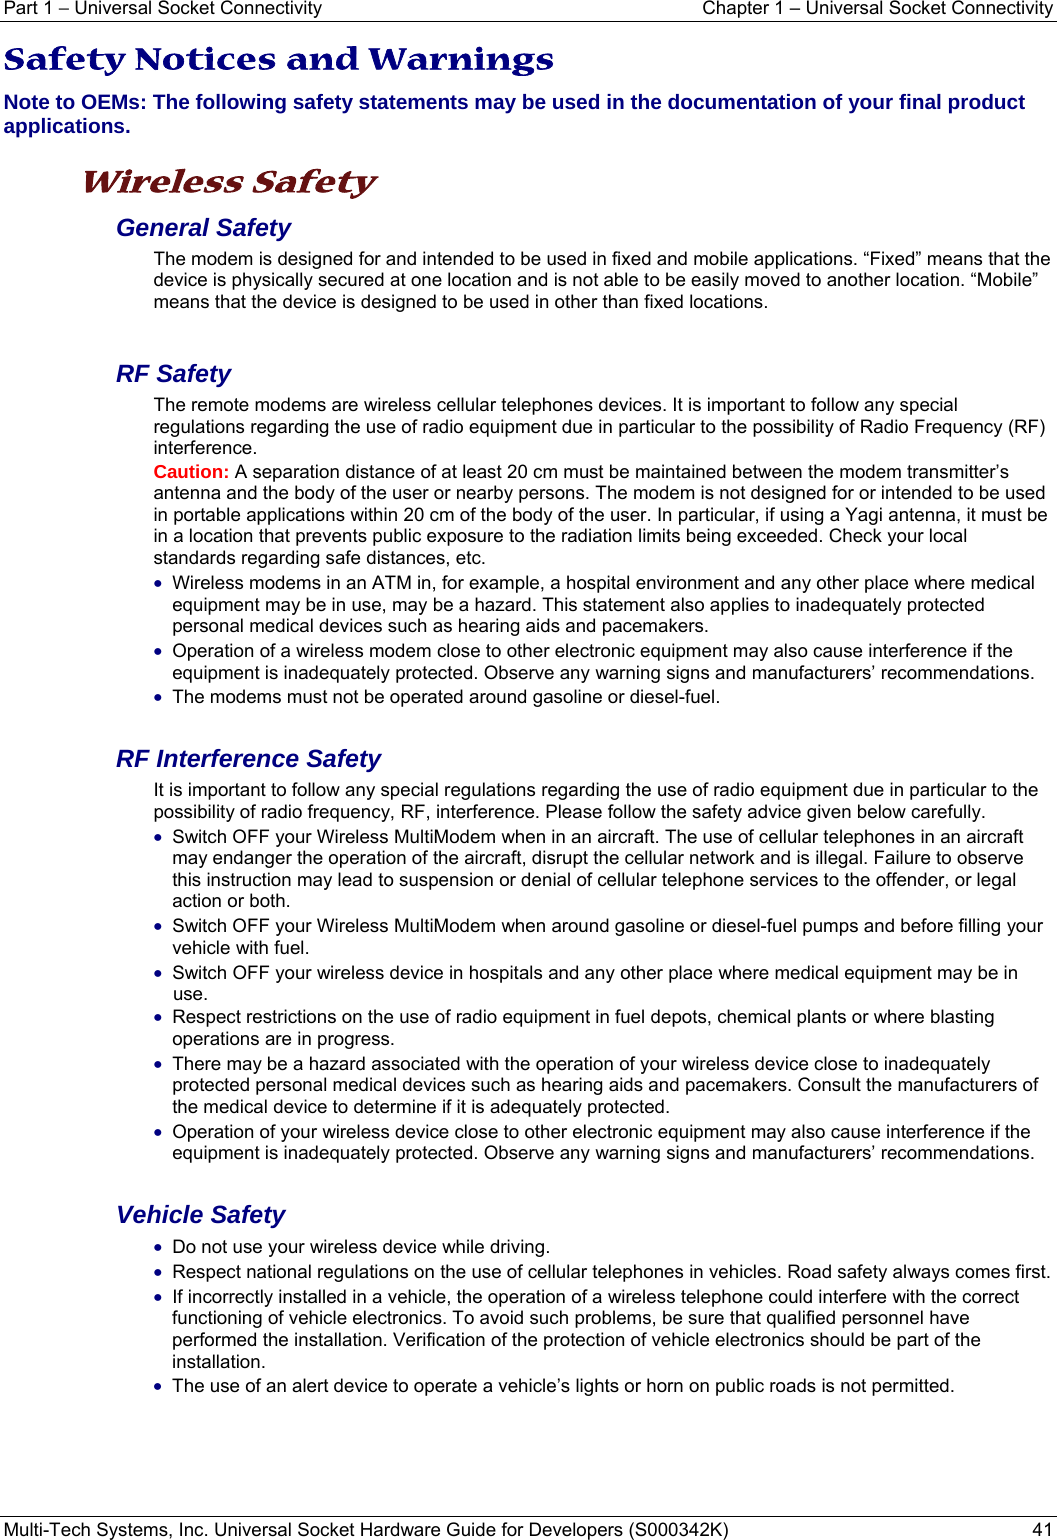 Part 1 − Universal Socket Connectivity    Chapter 1 – Universal Socket Connectivity Multi-Tech Systems, Inc. Universal Socket Hardware Guide for Developers (S000342K)  41  Safety Notices and Warnings Note to OEMs: The following safety statements may be used in the documentation of your final product applications.  Wireless Safety  General Safety The modem is designed for and intended to be used in fixed and mobile applications. “Fixed” means that the device is physically secured at one location and is not able to be easily moved to another location. “Mobile” means that the device is designed to be used in other than fixed locations.  RF Safety The remote modems are wireless cellular telephones devices. It is important to follow any special regulations regarding the use of radio equipment due in particular to the possibility of Radio Frequency (RF) interference. Caution: A separation distance of at least 20 cm must be maintained between the modem transmitter’s antenna and the body of the user or nearby persons. The modem is not designed for or intended to be used in portable applications within 20 cm of the body of the user. In particular, if using a Yagi antenna, it must be in a location that prevents public exposure to the radiation limits being exceeded. Check your local standards regarding safe distances, etc. • Wireless modems in an ATM in, for example, a hospital environment and any other place where medical equipment may be in use, may be a hazard. This statement also applies to inadequately protected personal medical devices such as hearing aids and pacemakers. • Operation of a wireless modem close to other electronic equipment may also cause interference if the equipment is inadequately protected. Observe any warning signs and manufacturers’ recommendations. • The modems must not be operated around gasoline or diesel-fuel.  RF Interference Safety It is important to follow any special regulations regarding the use of radio equipment due in particular to the possibility of radio frequency, RF, interference. Please follow the safety advice given below carefully. • Switch OFF your Wireless MultiModem when in an aircraft. The use of cellular telephones in an aircraft may endanger the operation of the aircraft, disrupt the cellular network and is illegal. Failure to observe this instruction may lead to suspension or denial of cellular telephone services to the offender, or legal action or both. • Switch OFF your Wireless MultiModem when around gasoline or diesel-fuel pumps and before filling your vehicle with fuel. • Switch OFF your wireless device in hospitals and any other place where medical equipment may be in use. • Respect restrictions on the use of radio equipment in fuel depots, chemical plants or where blasting operations are in progress. • There may be a hazard associated with the operation of your wireless device close to inadequately protected personal medical devices such as hearing aids and pacemakers. Consult the manufacturers of the medical device to determine if it is adequately protected. • Operation of your wireless device close to other electronic equipment may also cause interference if the equipment is inadequately protected. Observe any warning signs and manufacturers’ recommendations.  Vehicle Safety • Do not use your wireless device while driving. • Respect national regulations on the use of cellular telephones in vehicles. Road safety always comes first. • If incorrectly installed in a vehicle, the operation of a wireless telephone could interfere with the correct functioning of vehicle electronics. To avoid such problems, be sure that qualified personnel have performed the installation. Verification of the protection of vehicle electronics should be part of the installation. • The use of an alert device to operate a vehicle’s lights or horn on public roads is not permitted.    